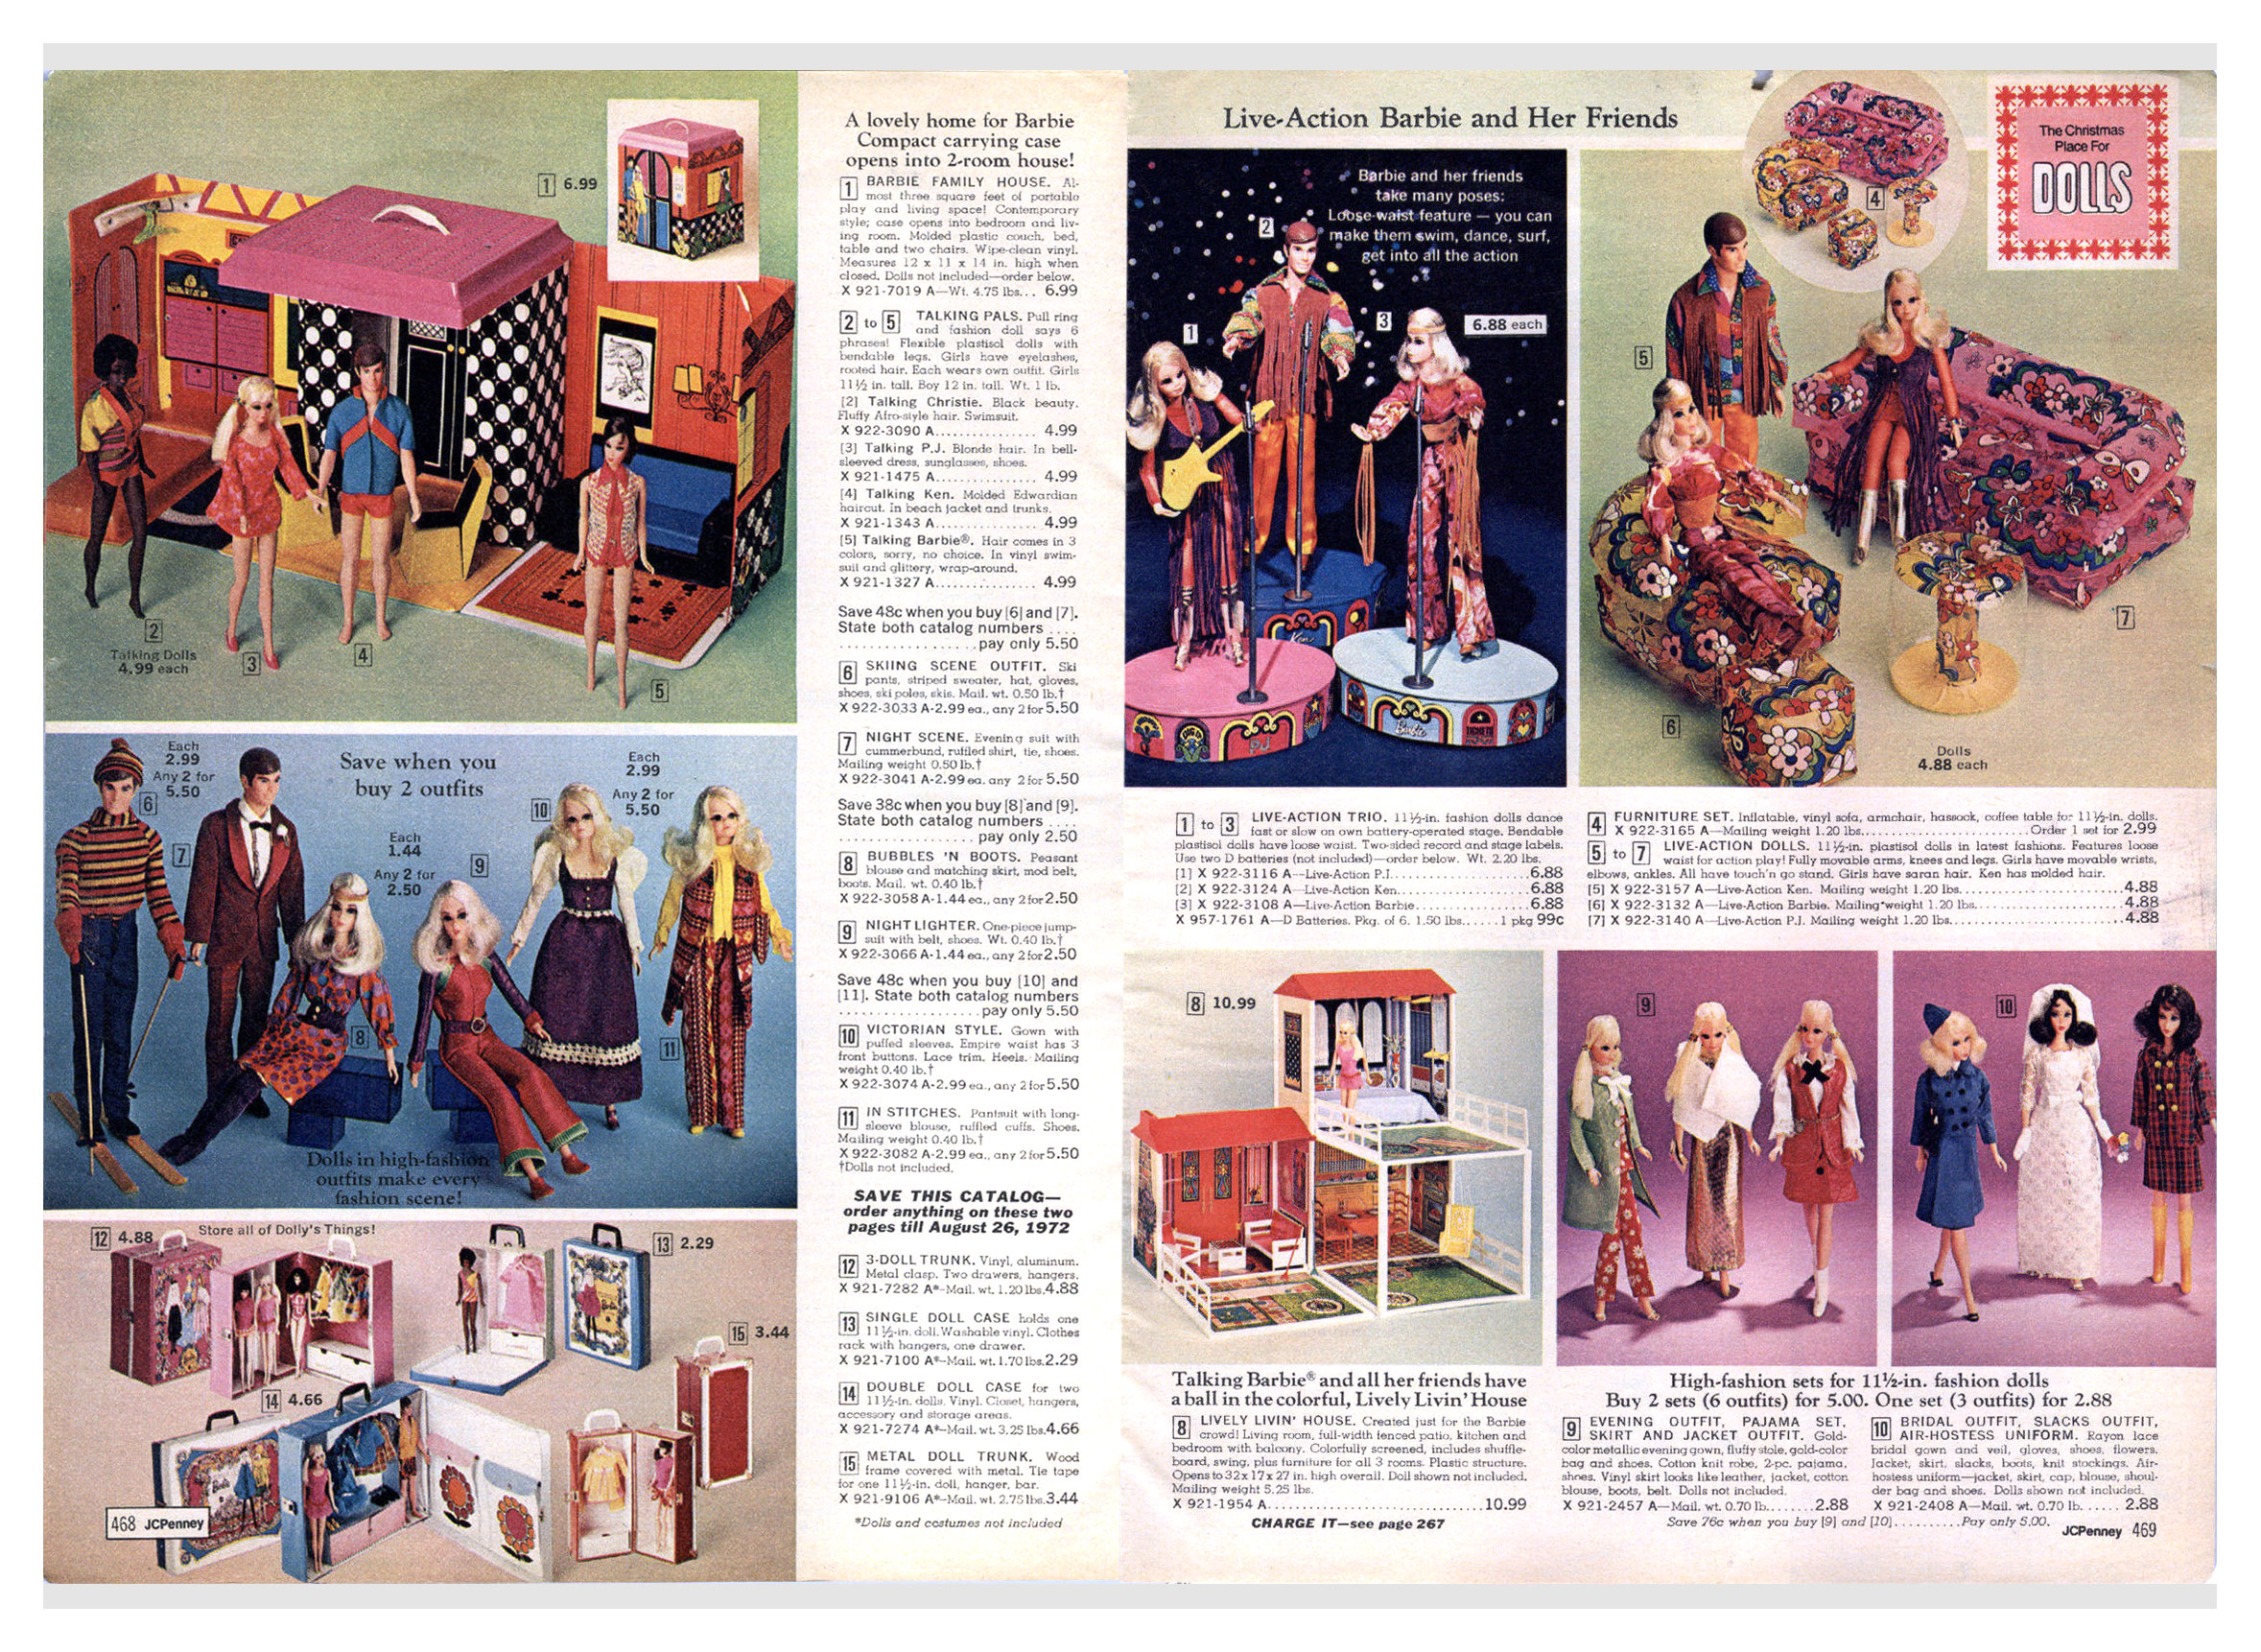 From 1971 JCPenney Christmas catalogue